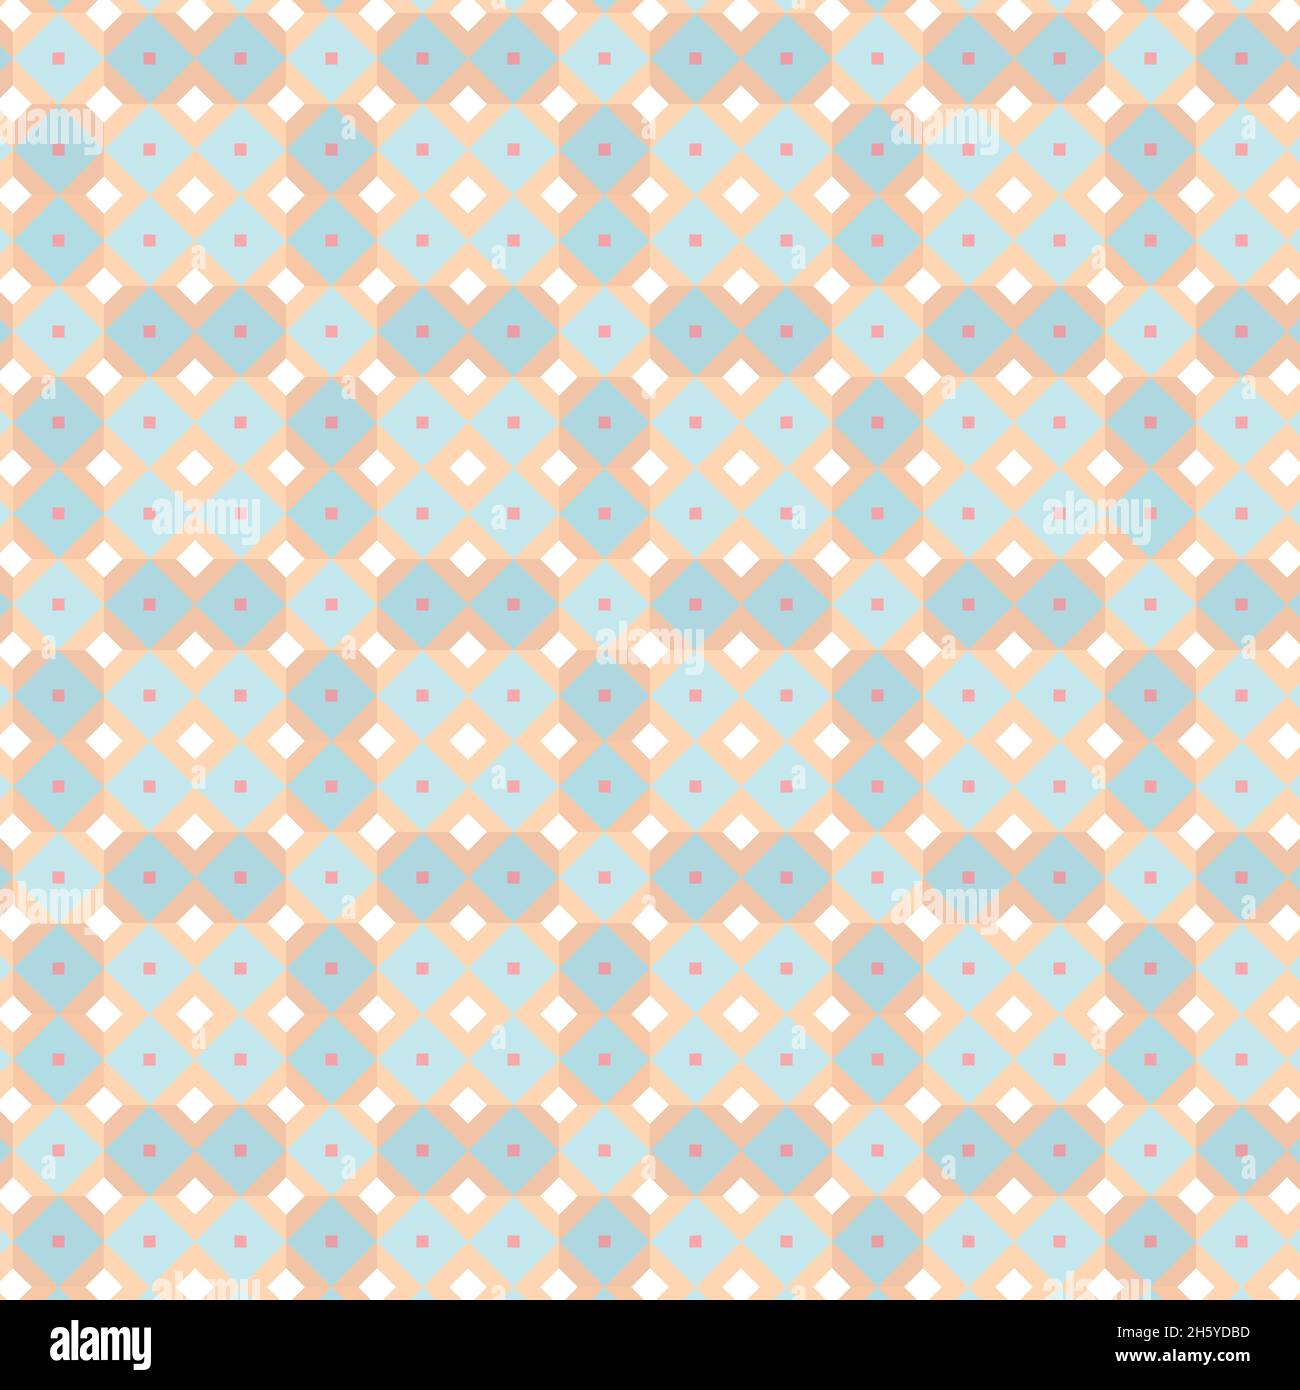 Pattern made of squares of various colors. It seems complicated, but it is regular, and it also causes optical illusion. Stock Vector